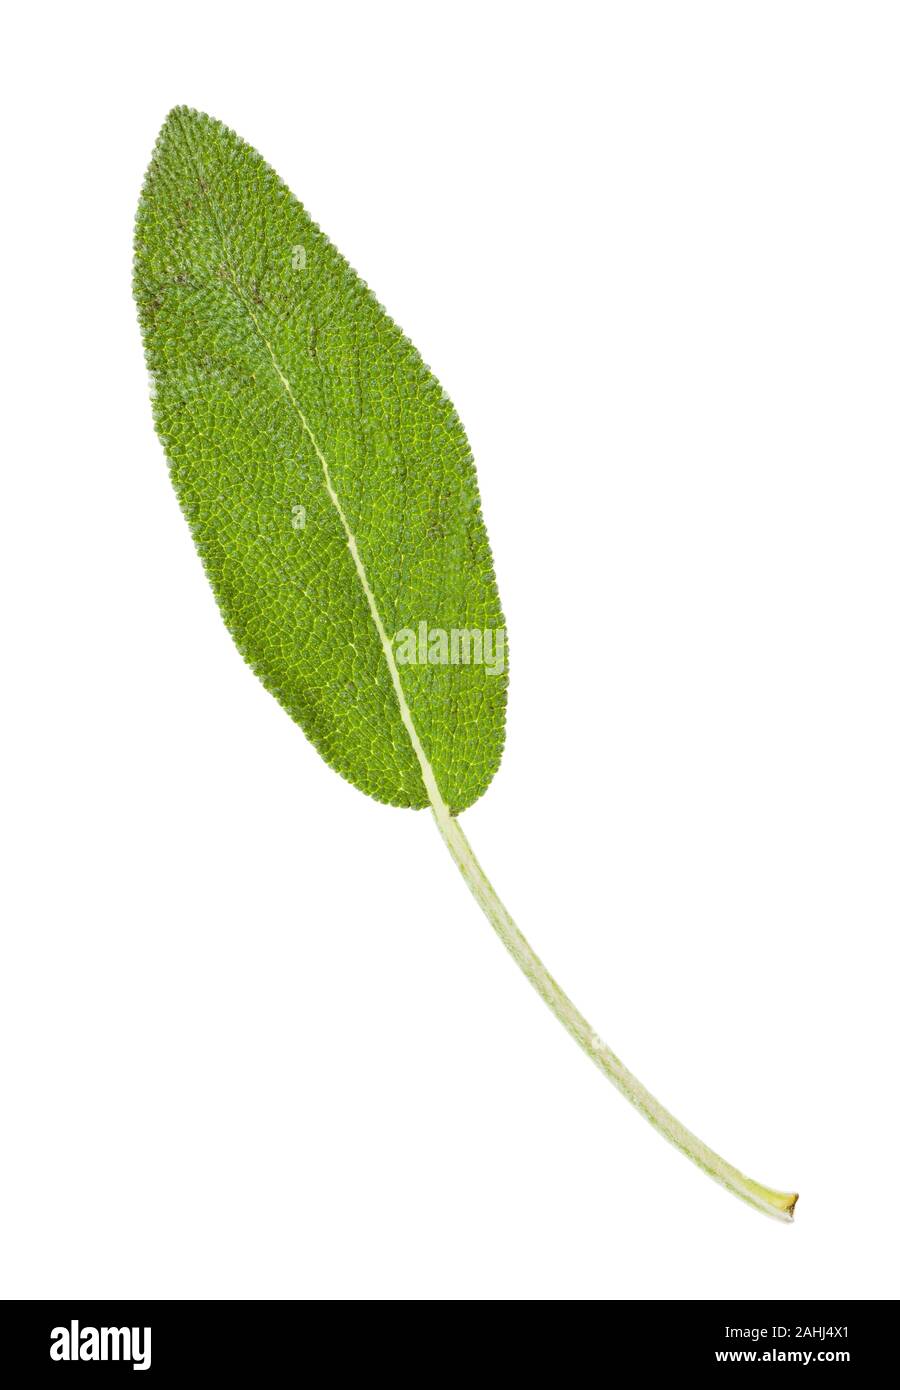 green leaf of sage (salvia officinalis) herb isolated on white background Stock Photo